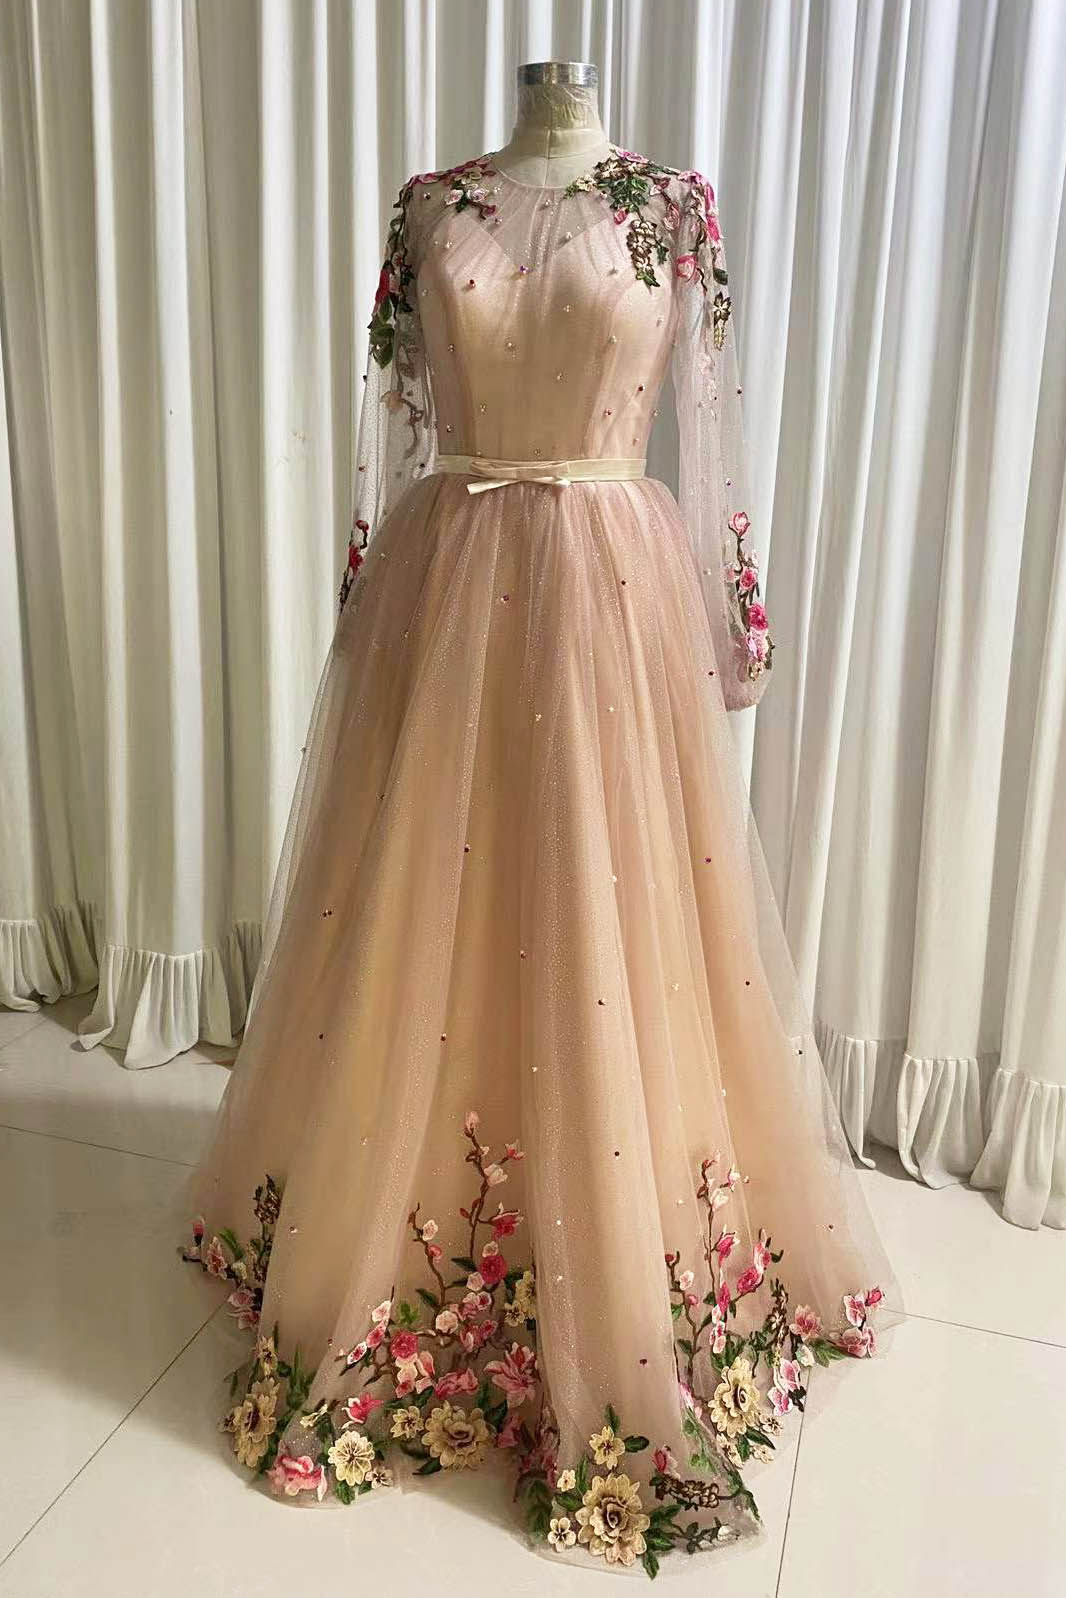 A Line Tulle Long Corset Prom Dress with Flowers, Pink Long Sleeves Party Dress with Beading outfit, Party Dresses Short Tight